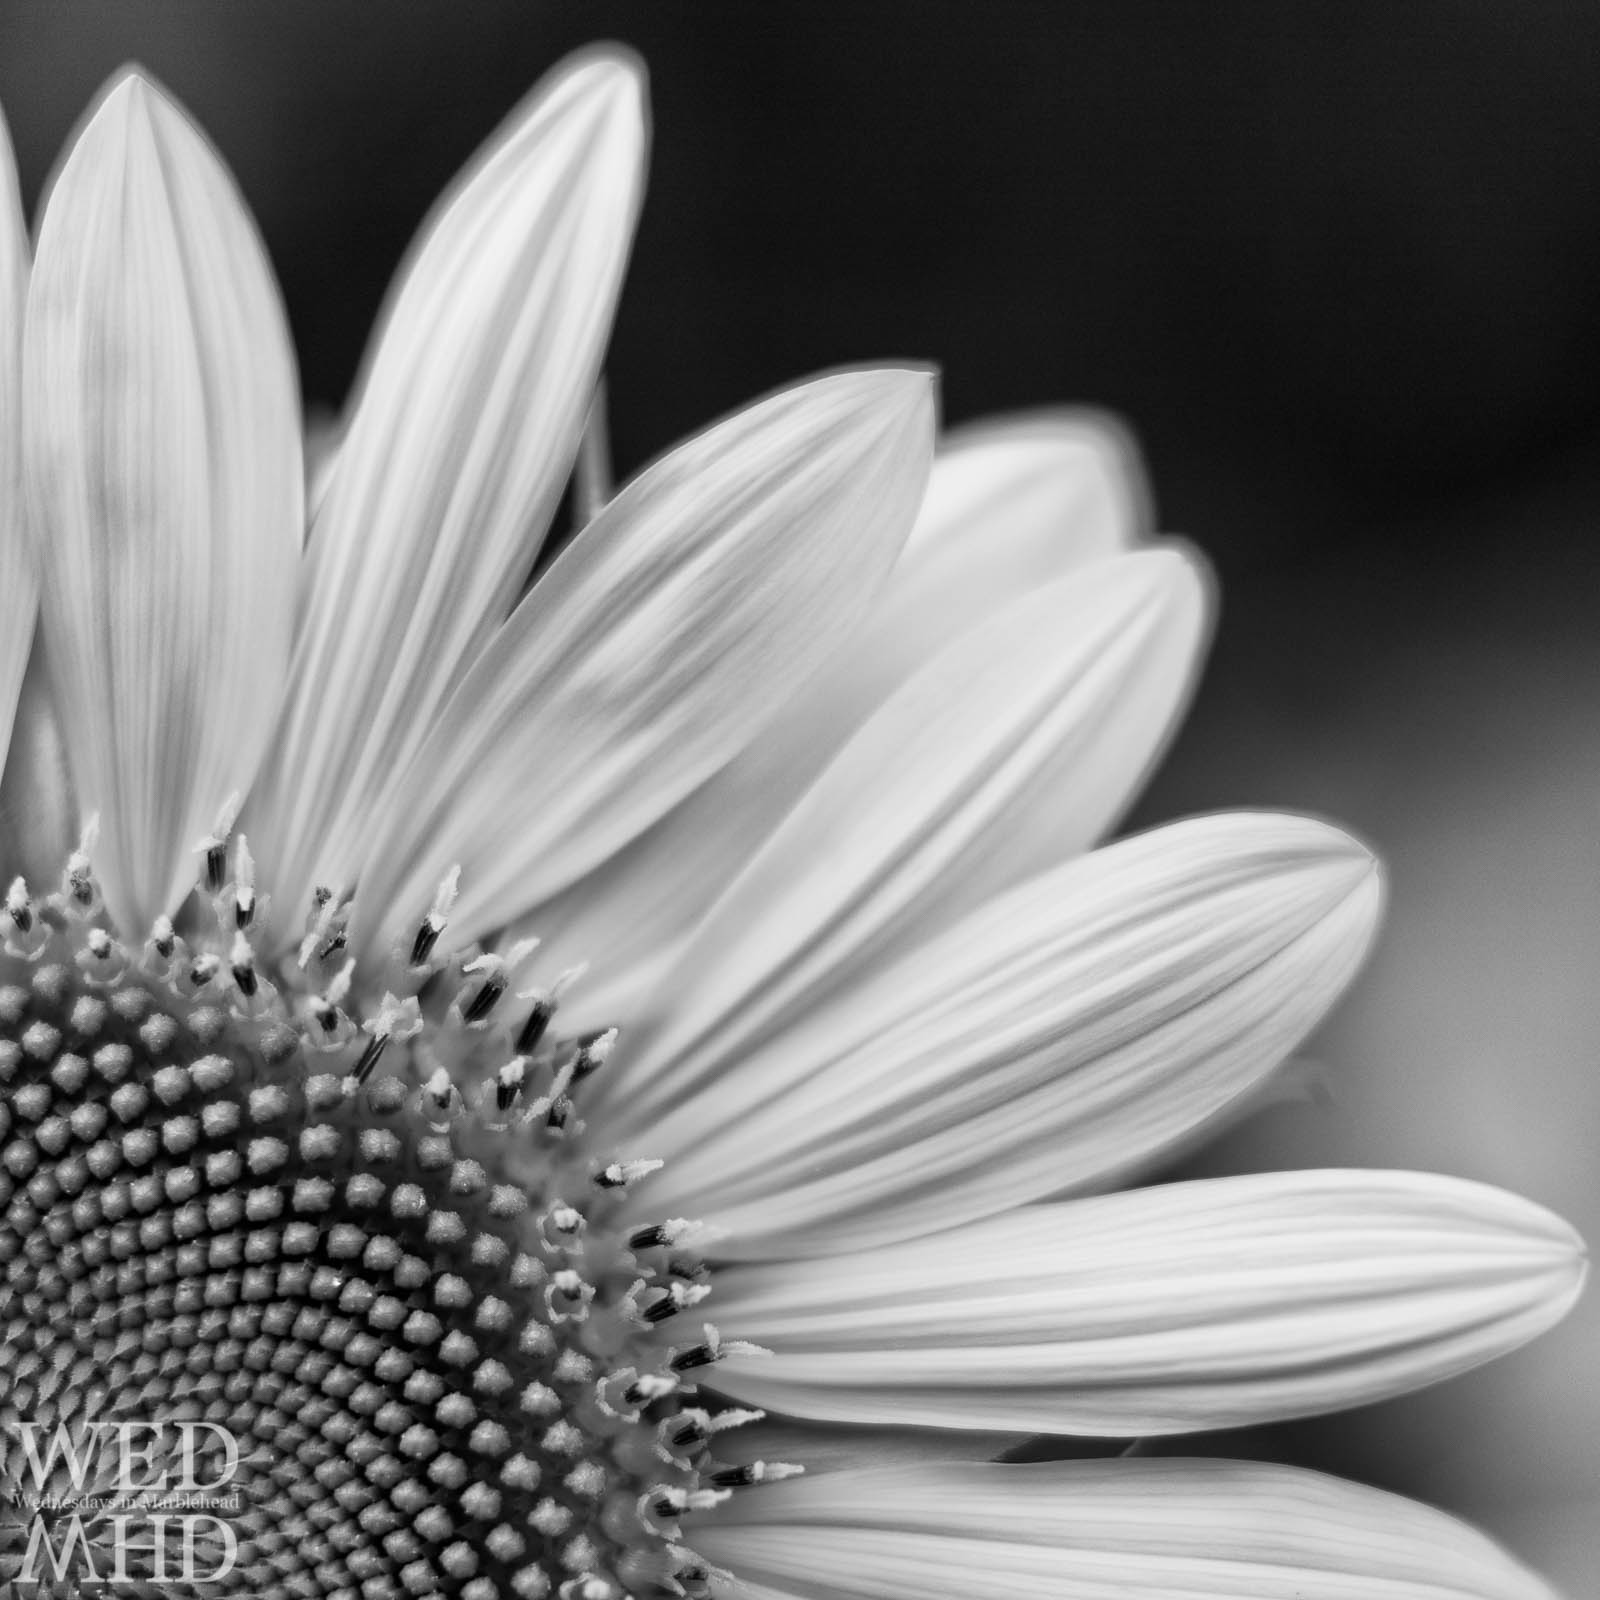 Sunflowers in Black and White